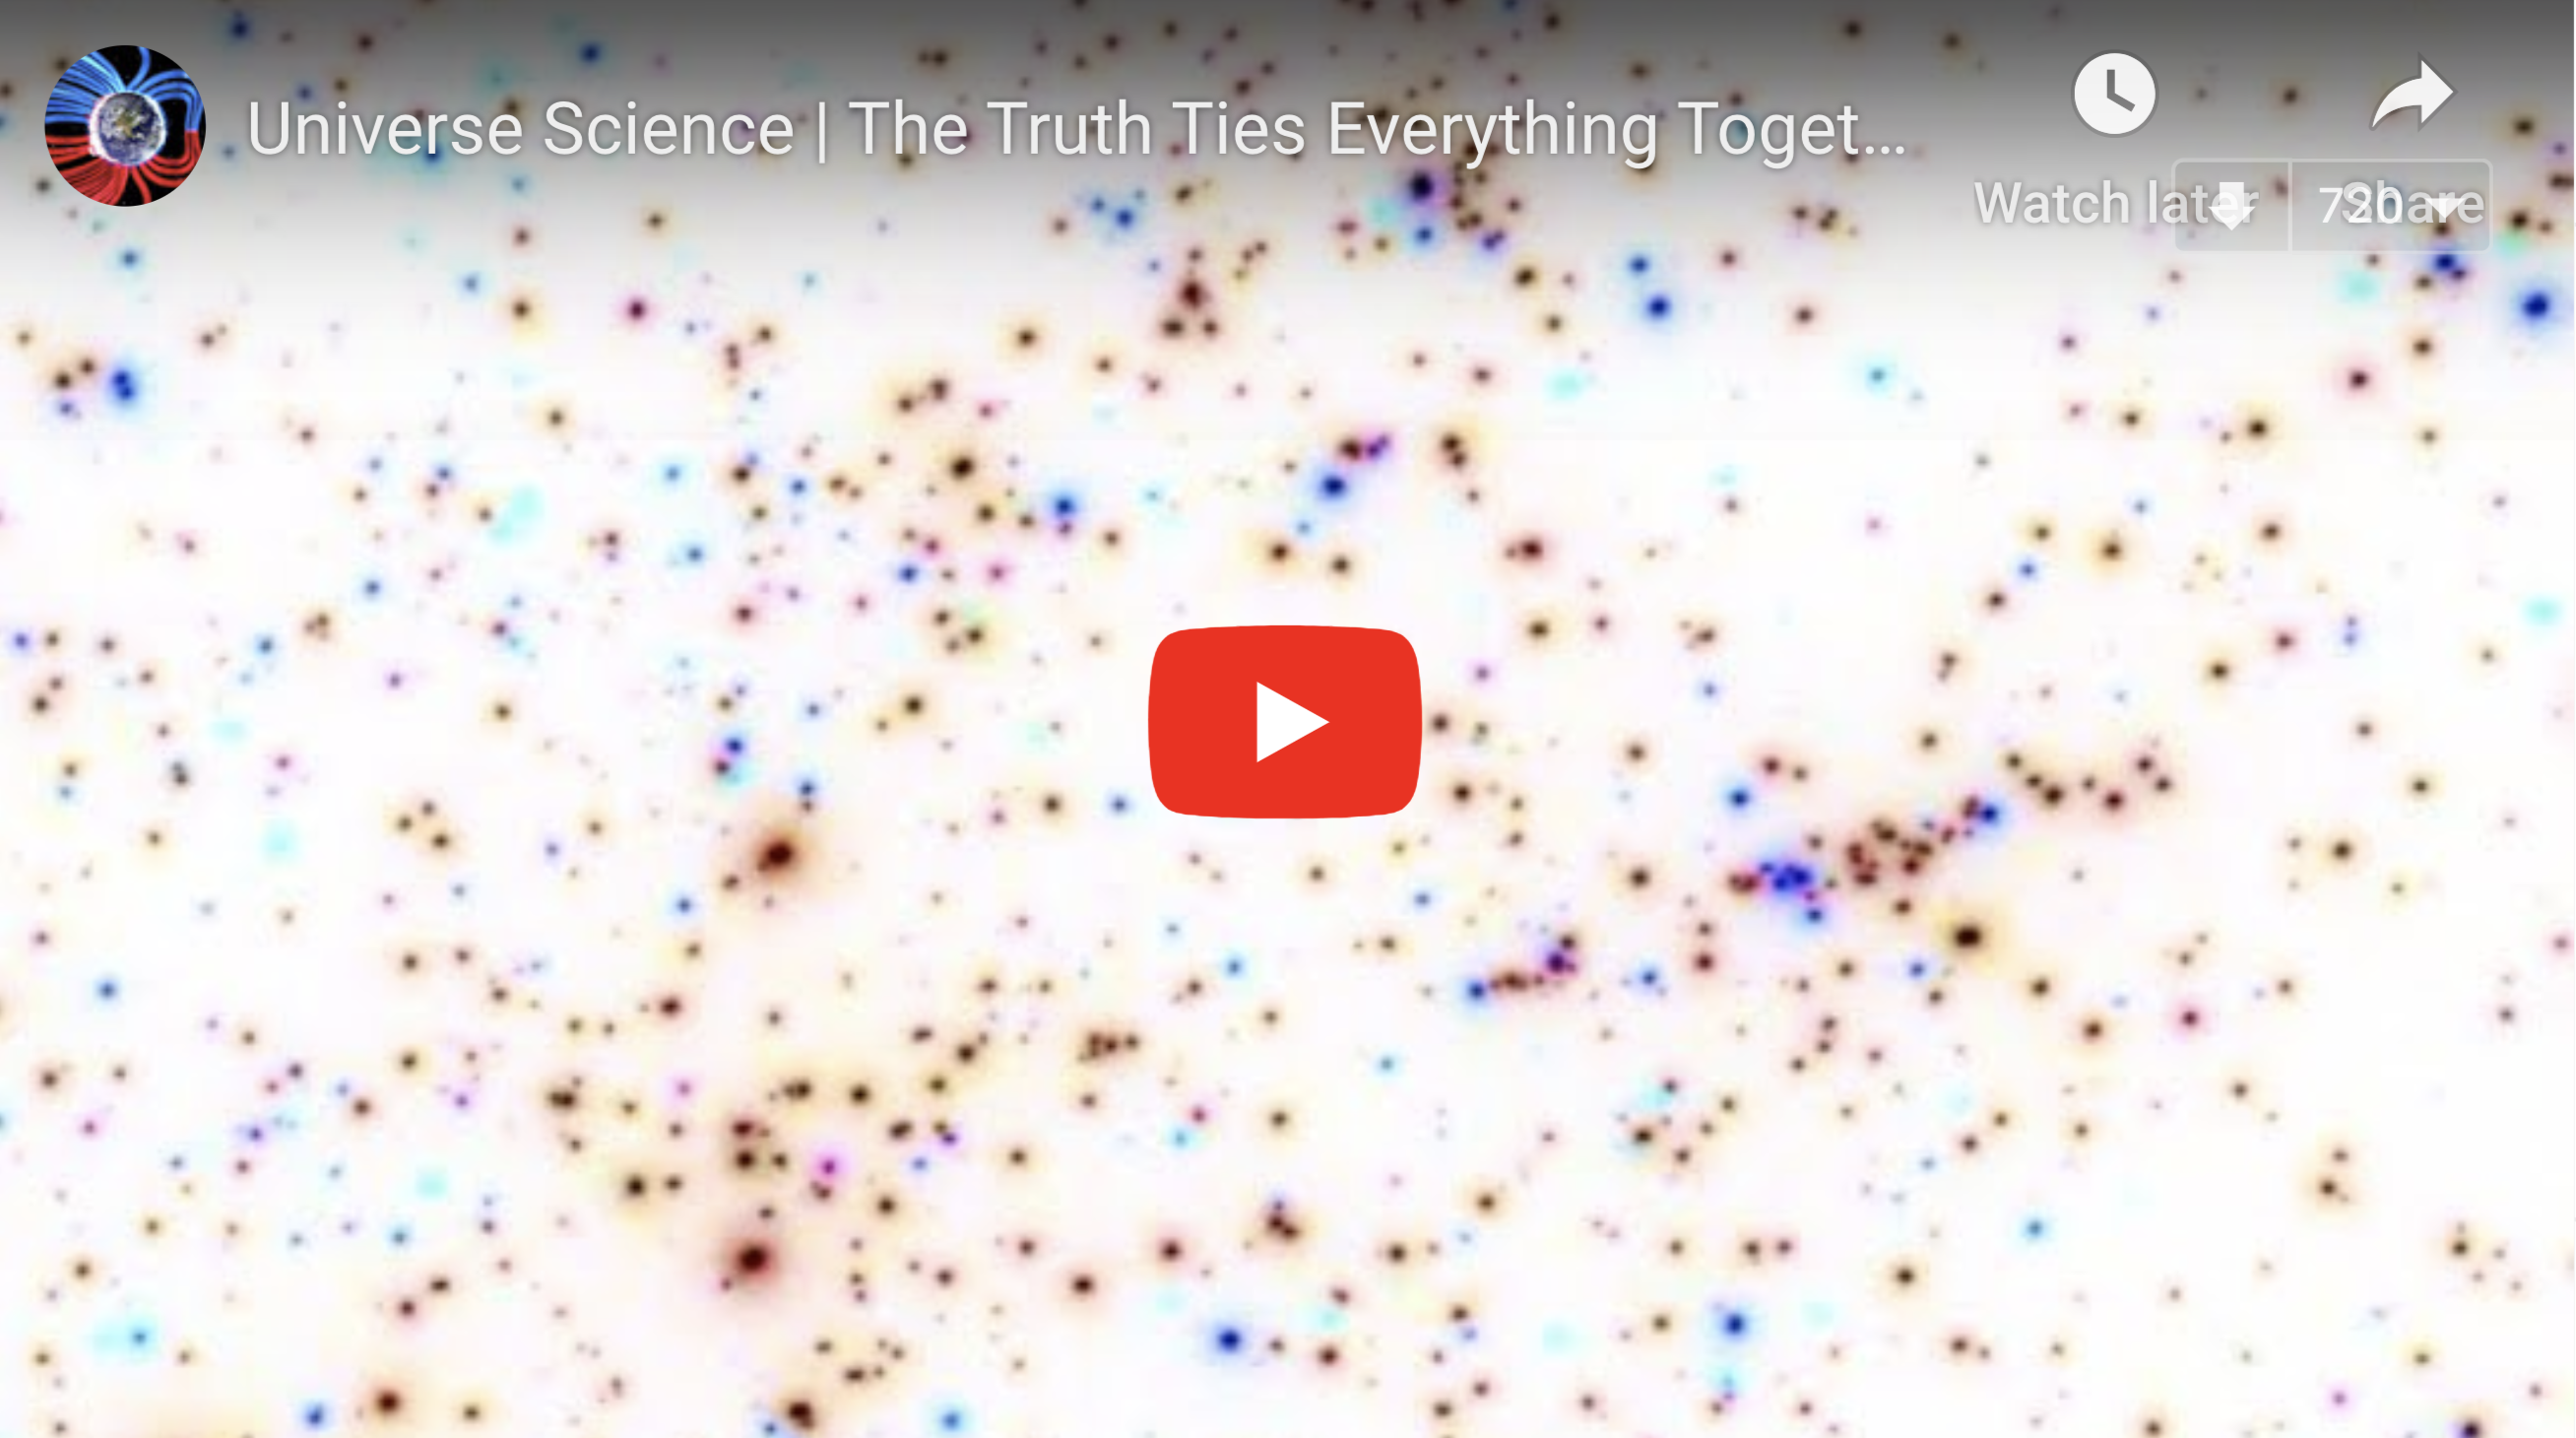 Universe Science The Truth Ties Everything Together 2 13 2020